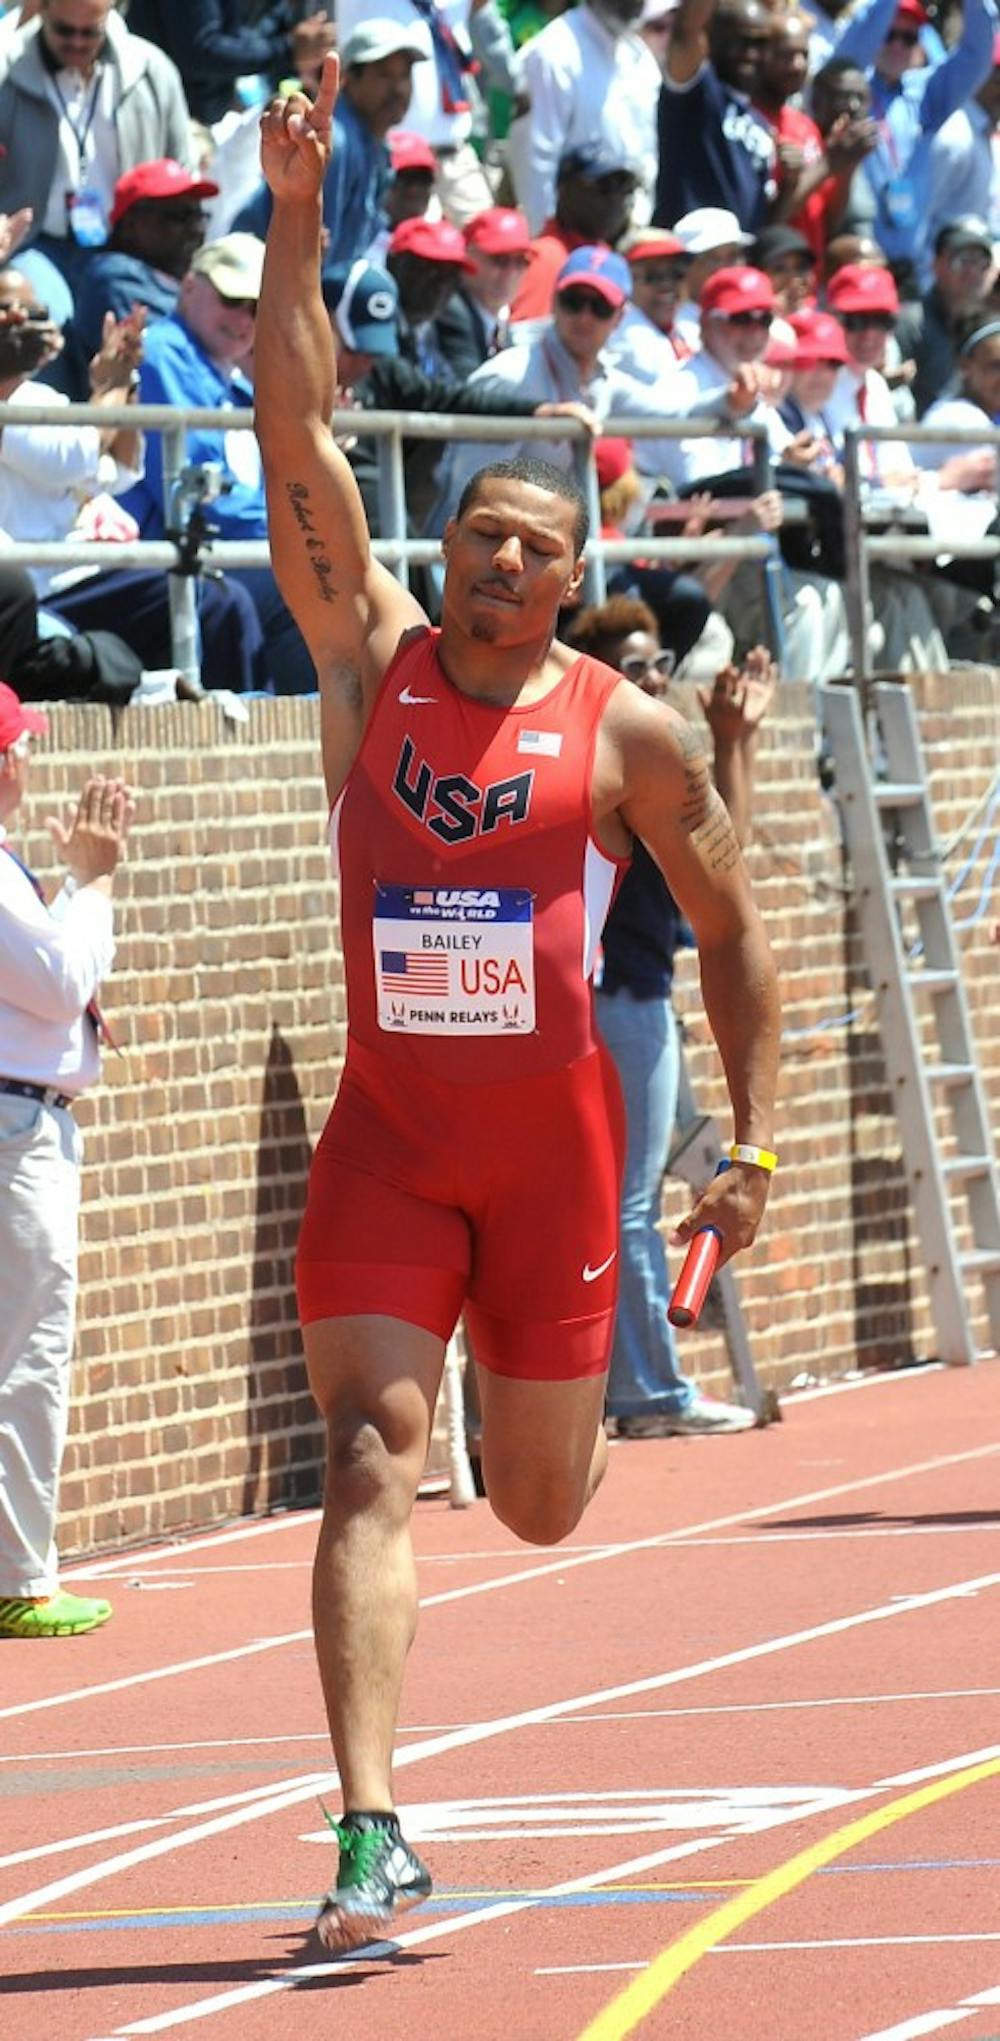 Penn Relays 2013, held at Franklin FIeld, featuring multiple Olympian athletes in the USA vs the World event